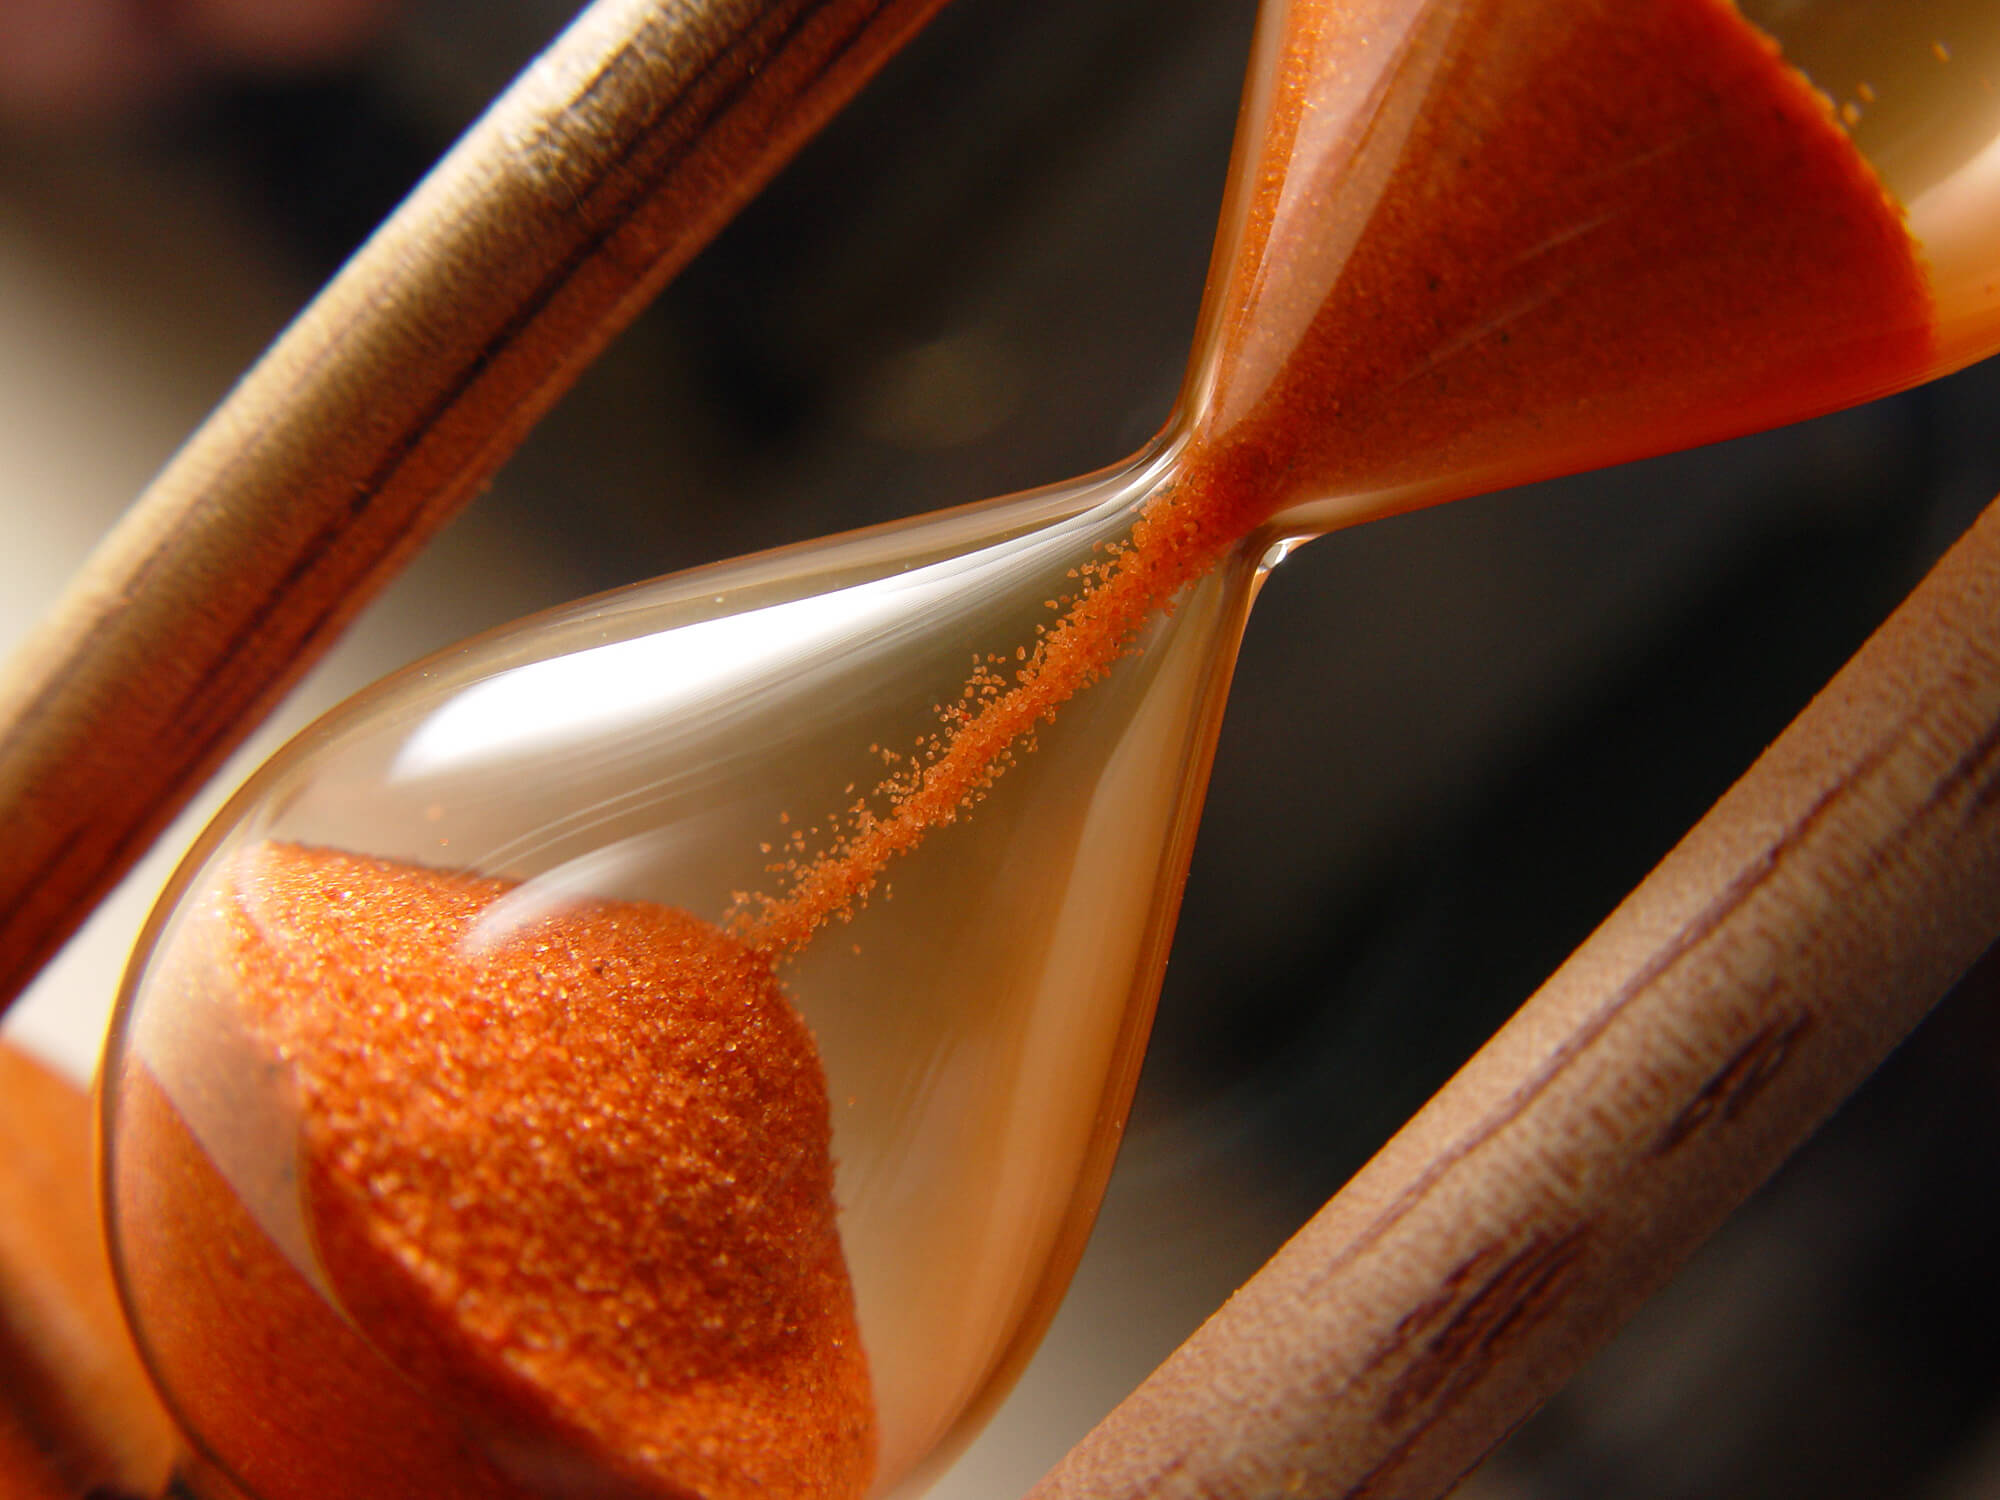 sand falls through the hourglass as time runs out